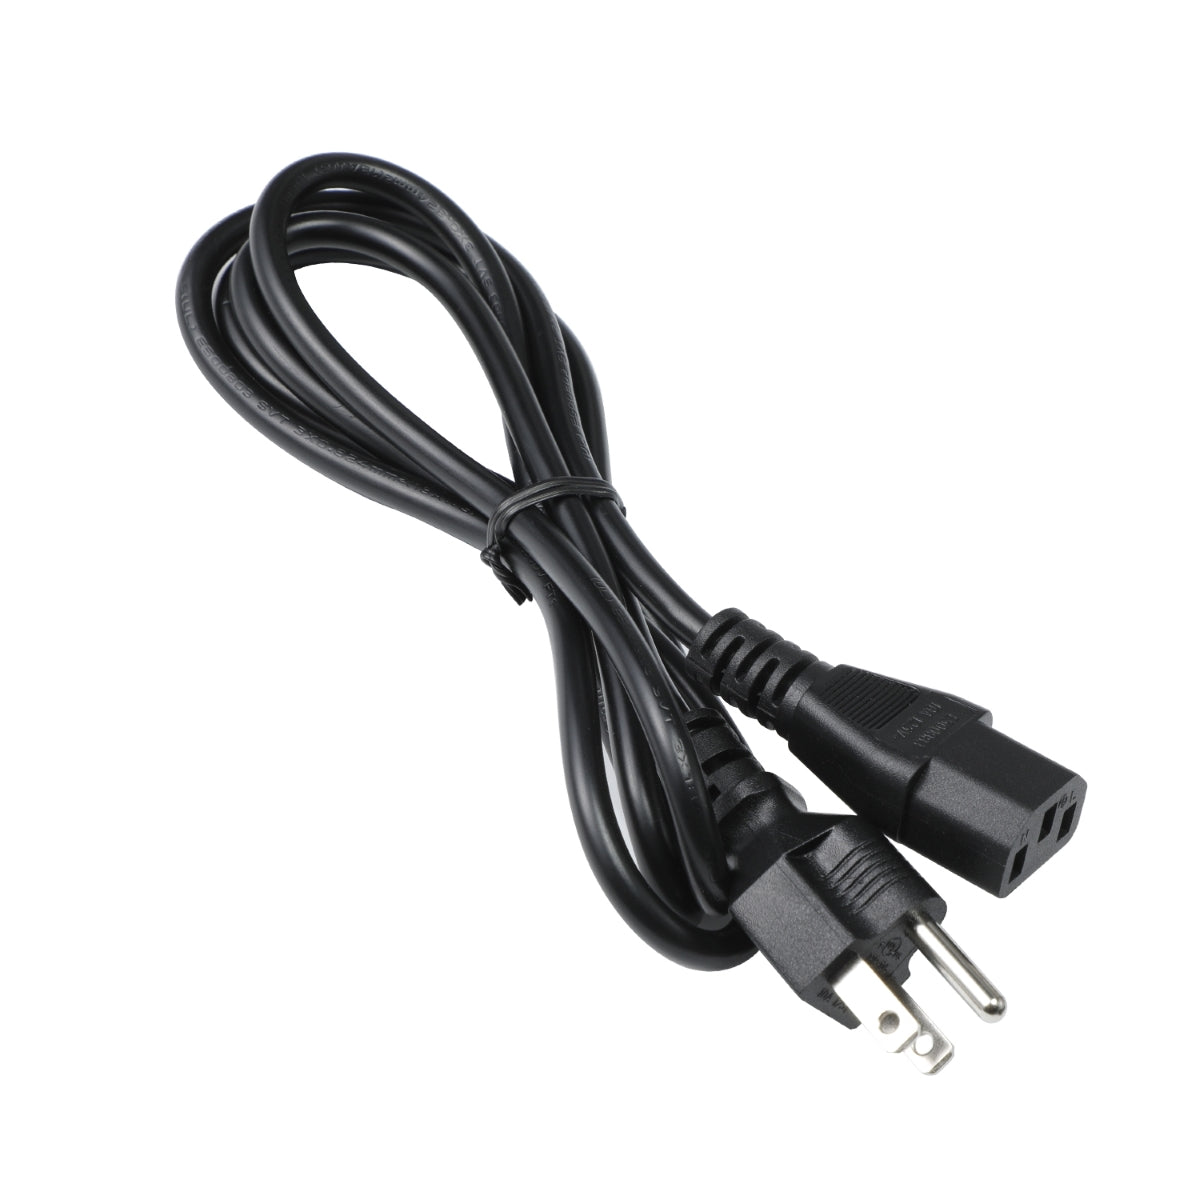 Power Cord for HP E201 Monitor